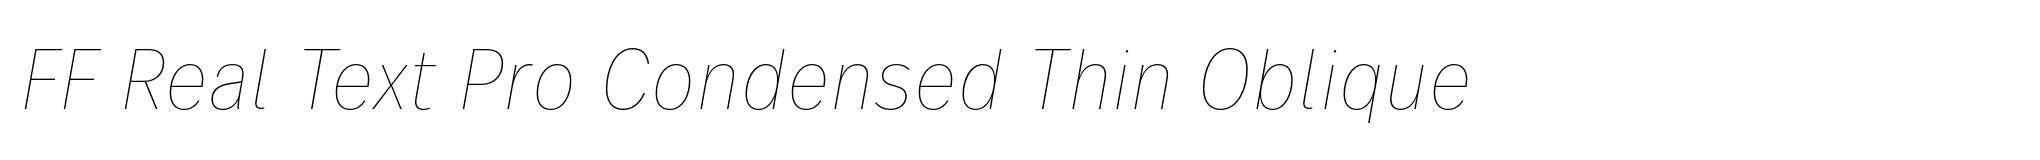 FF Real Text Pro Condensed Thin Oblique image